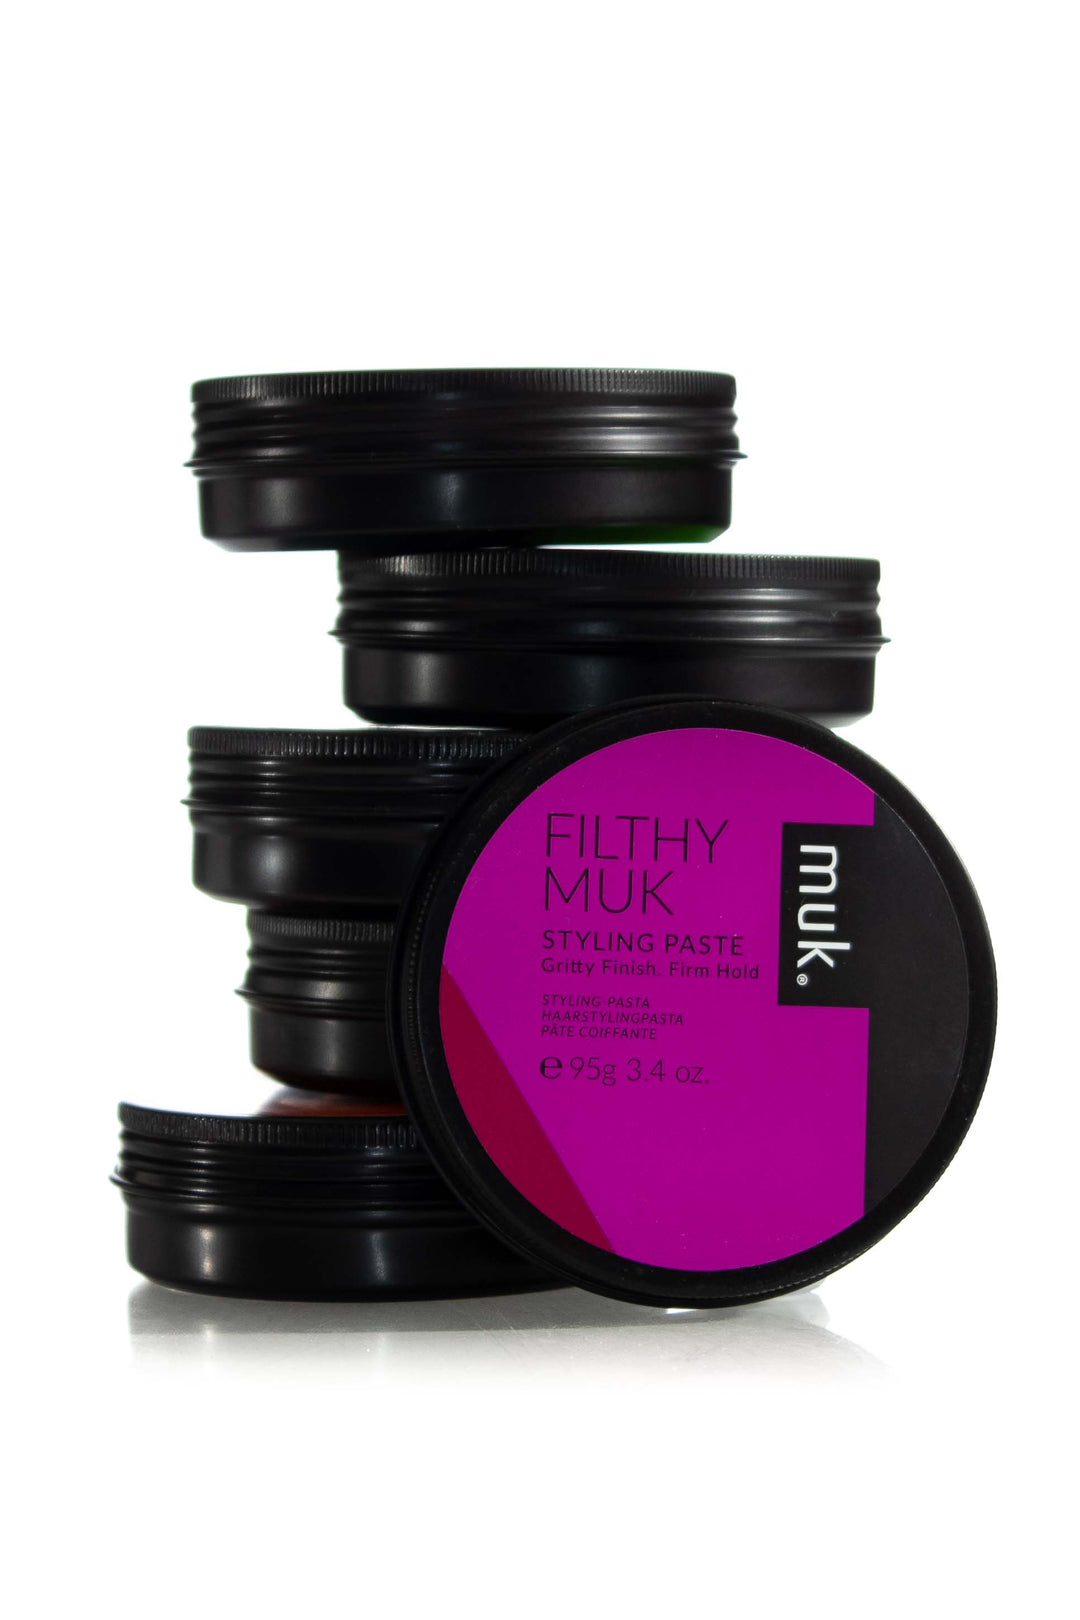 MUK Filthy Styling Paste | 95g